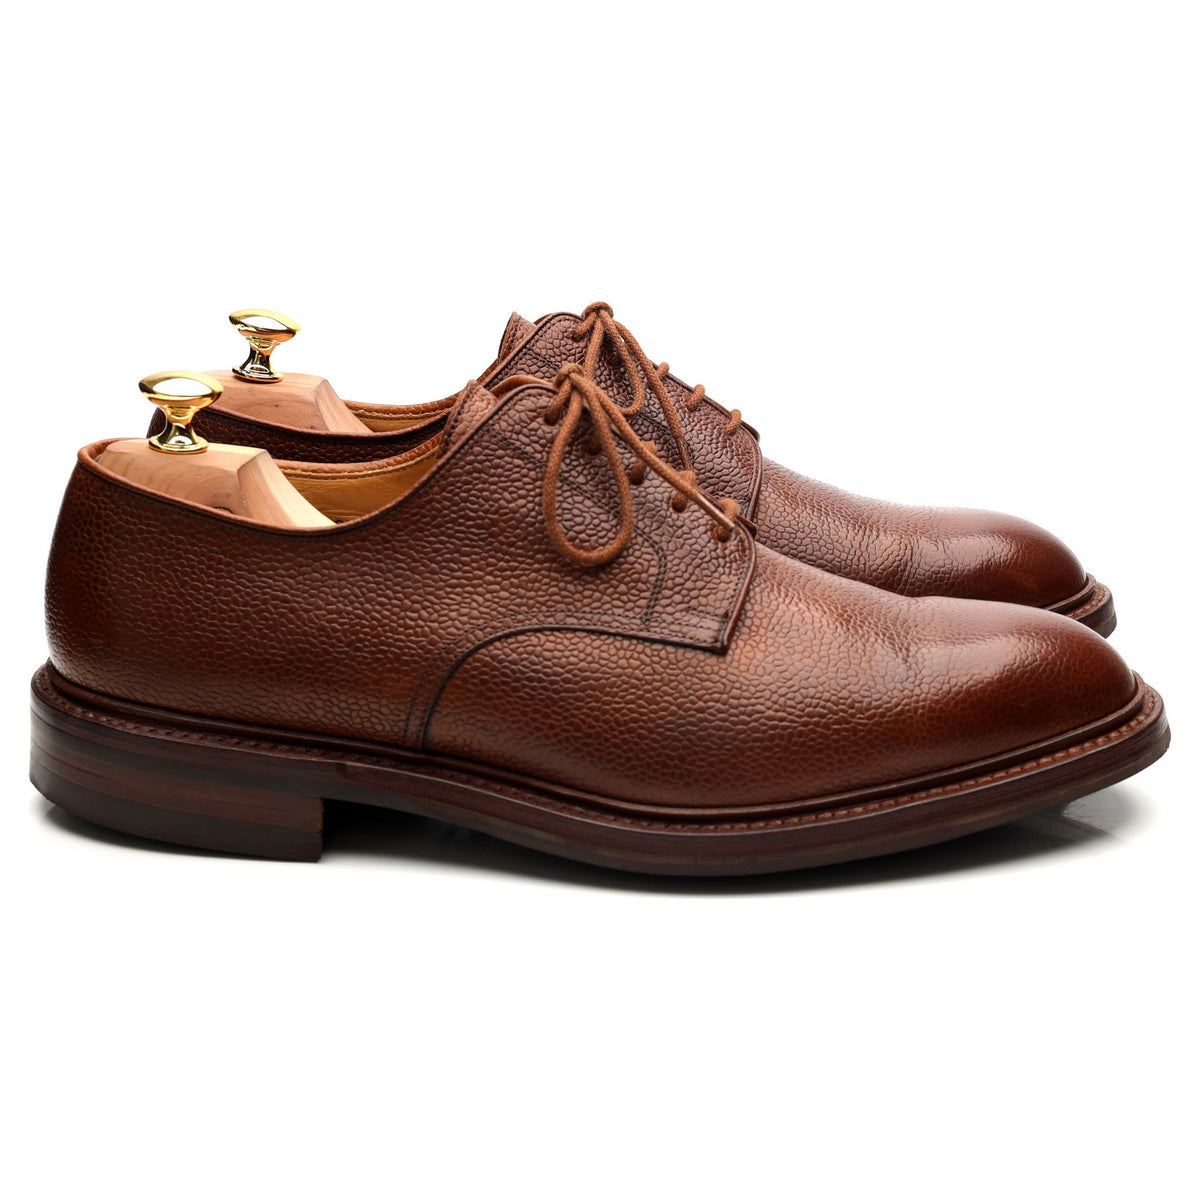 &#39;Grasmere&#39; Tan Brown Leather Derby UK 10.5 E